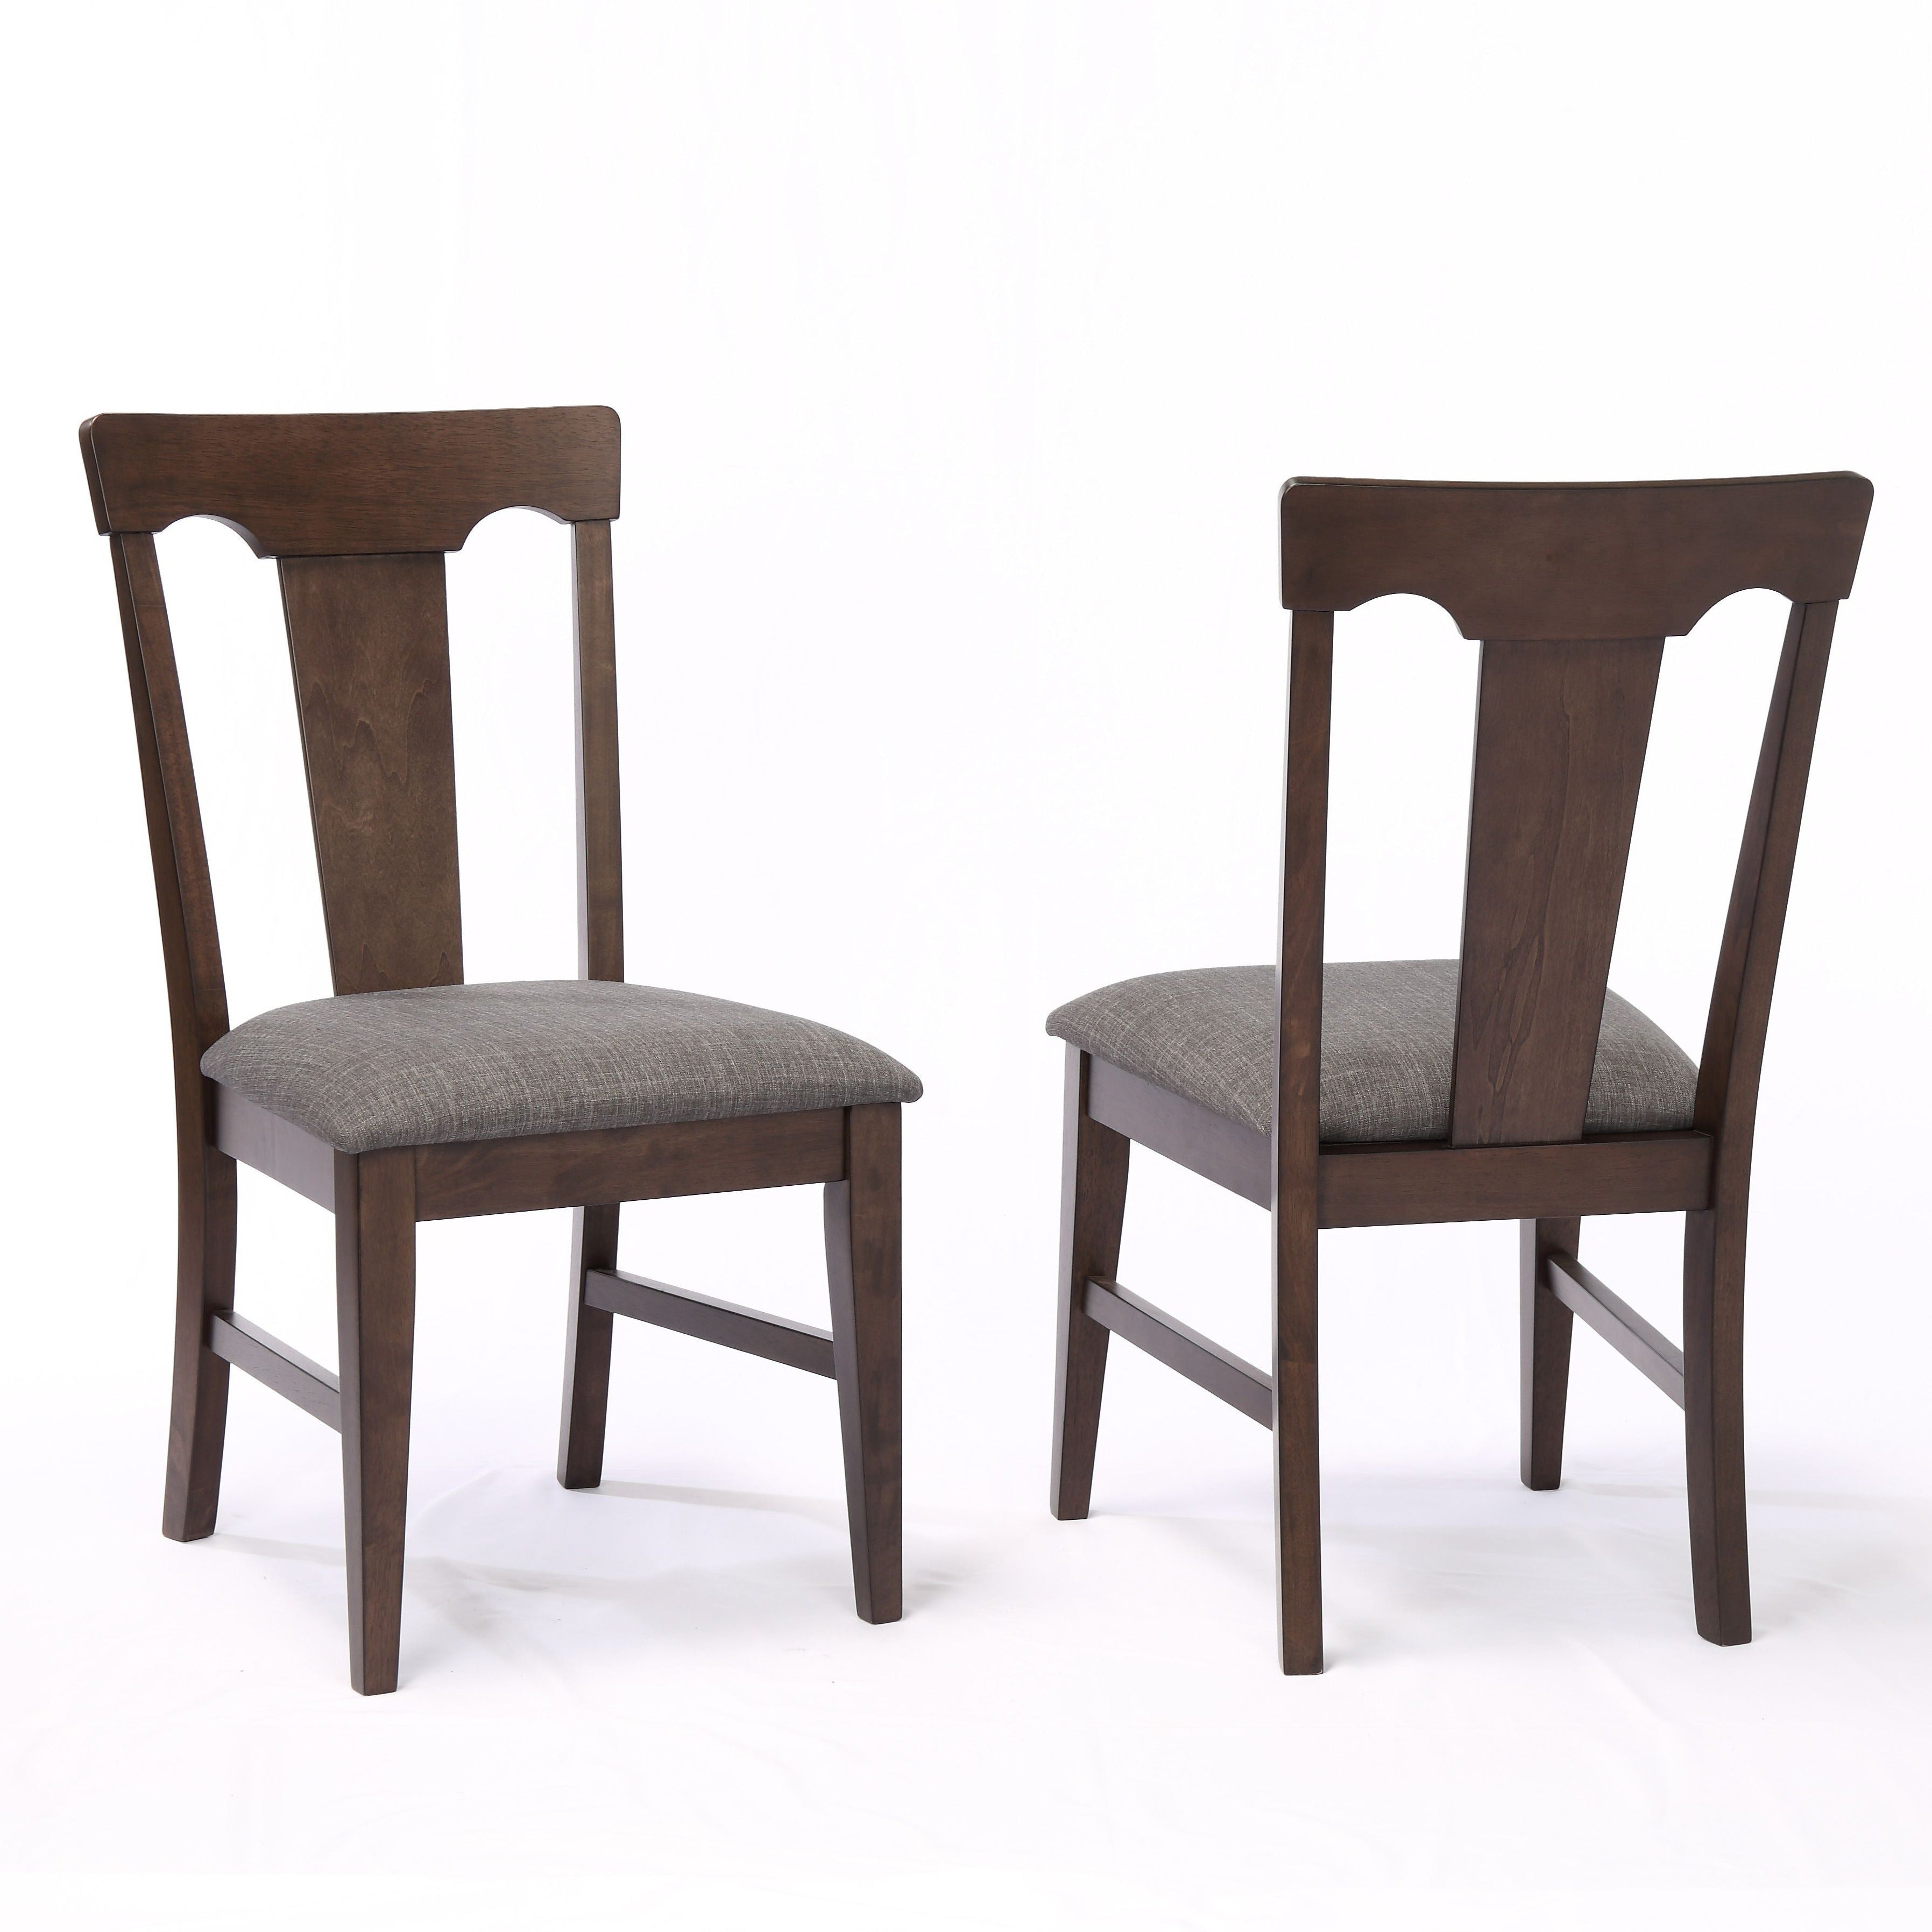 ECI Furniture Choices Panel Back Side Chair with Upholstered Seat(2pcs)